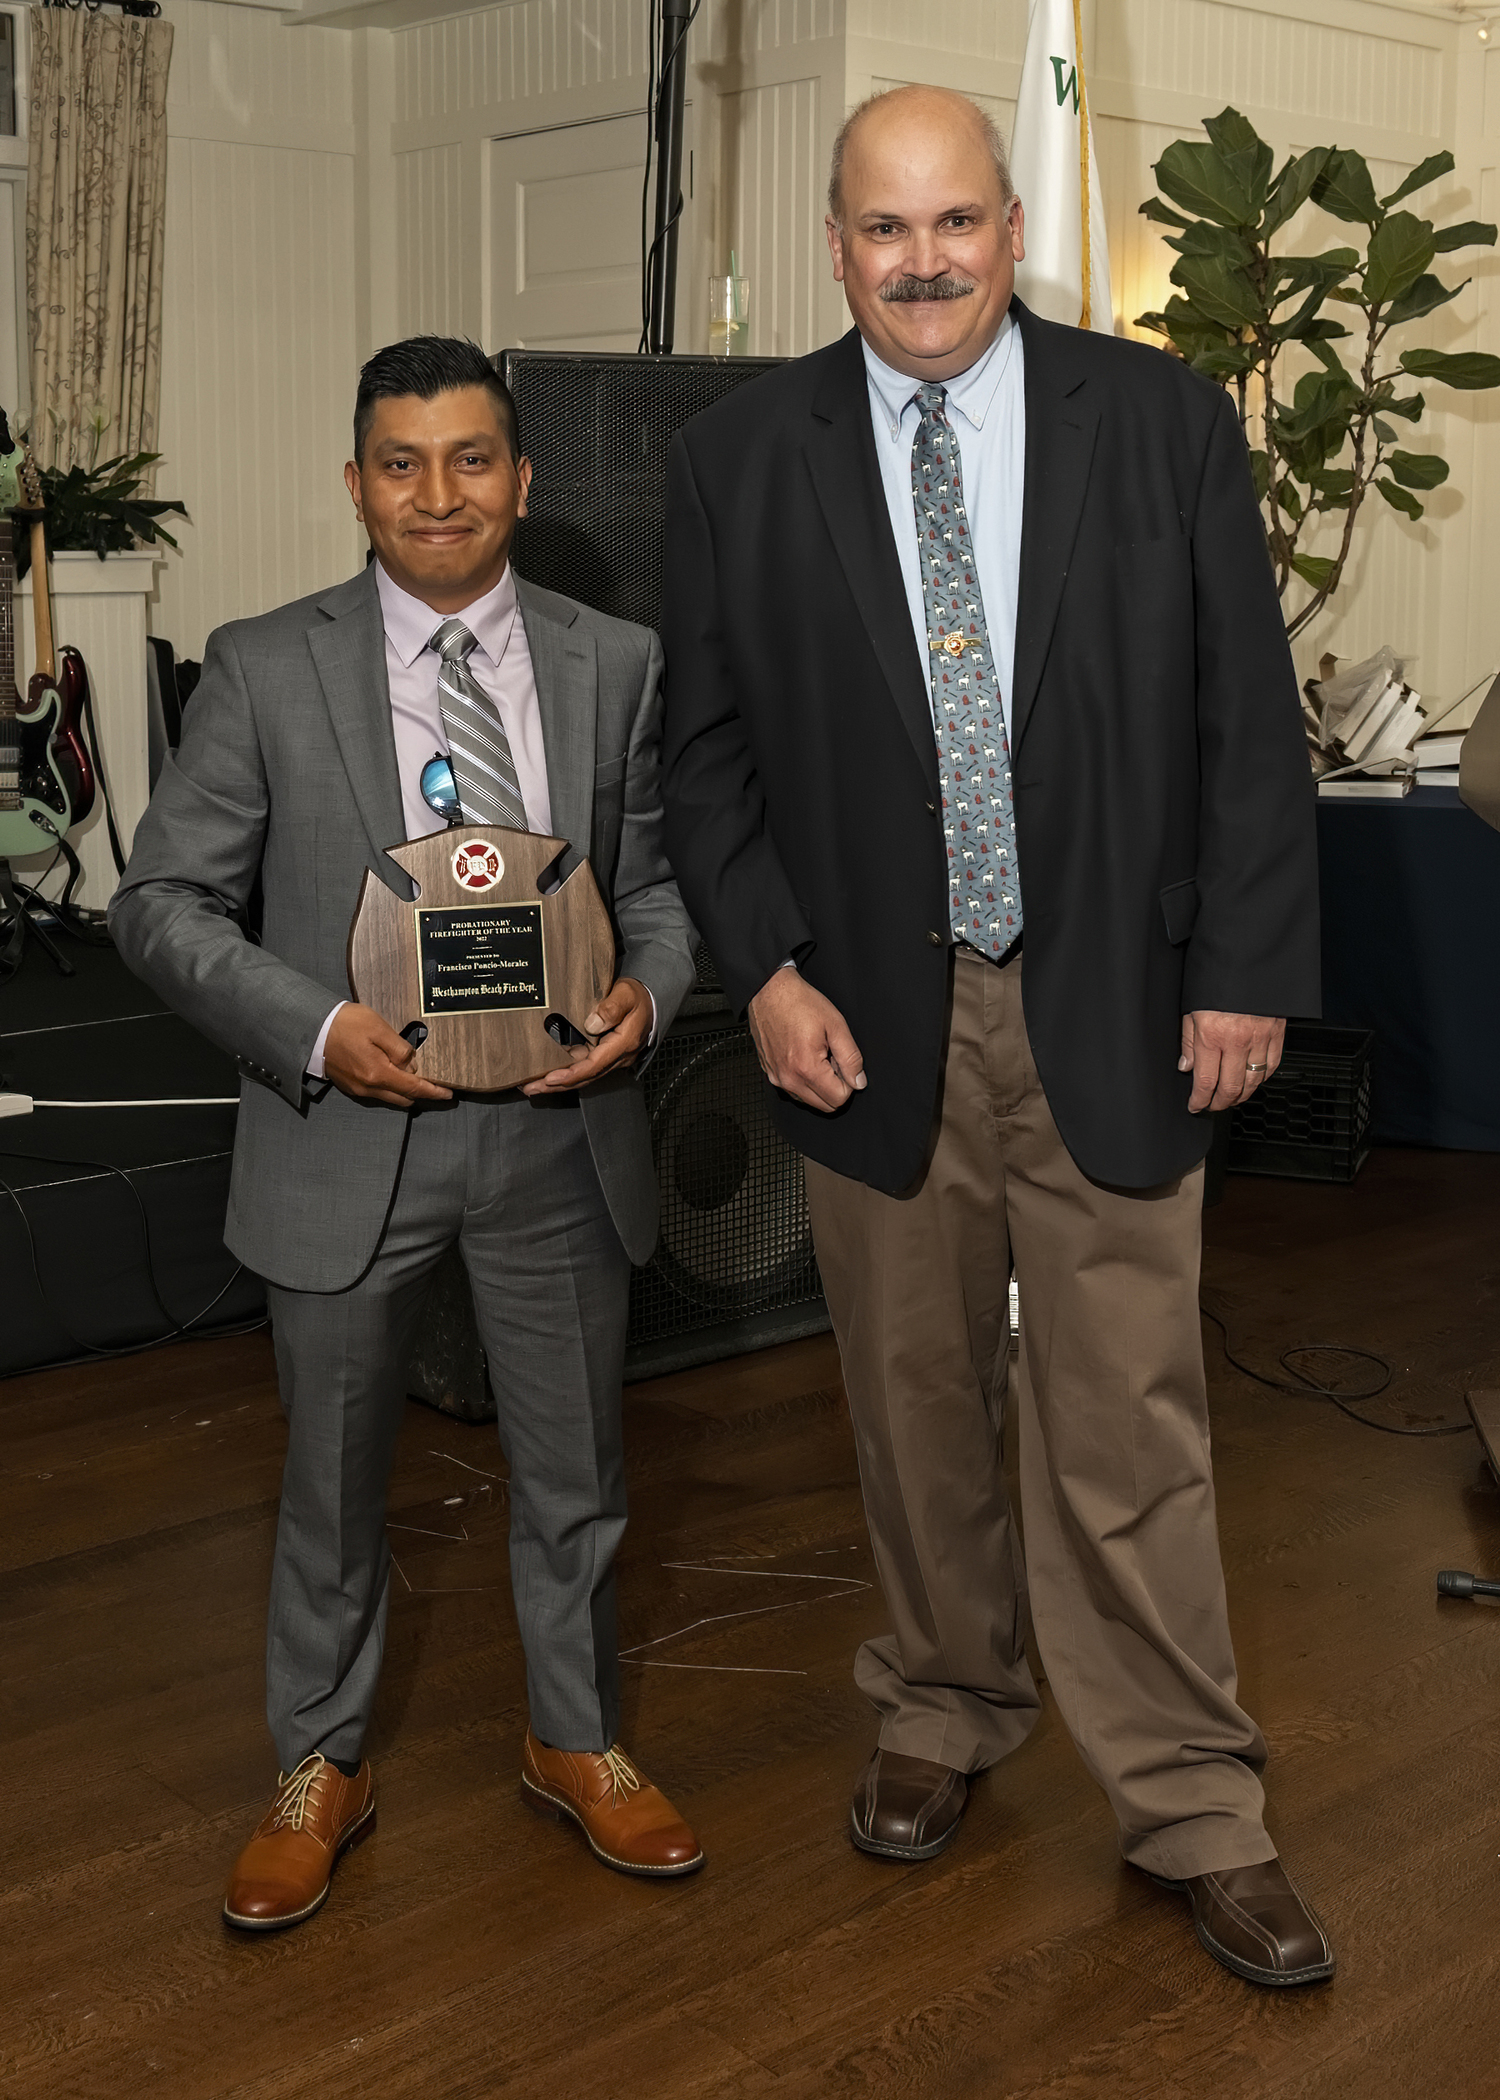 Francisco Morales-Poncio, left, with Chief Darryl Schunk, received the Probationary Firefighter of the Year Award  at the Westhampton Beach Fire Department annual dinner at the Westhampton Country Club on June2.    COURTESY WESTHAMPTON BEACH FIRE DEPARTMENT